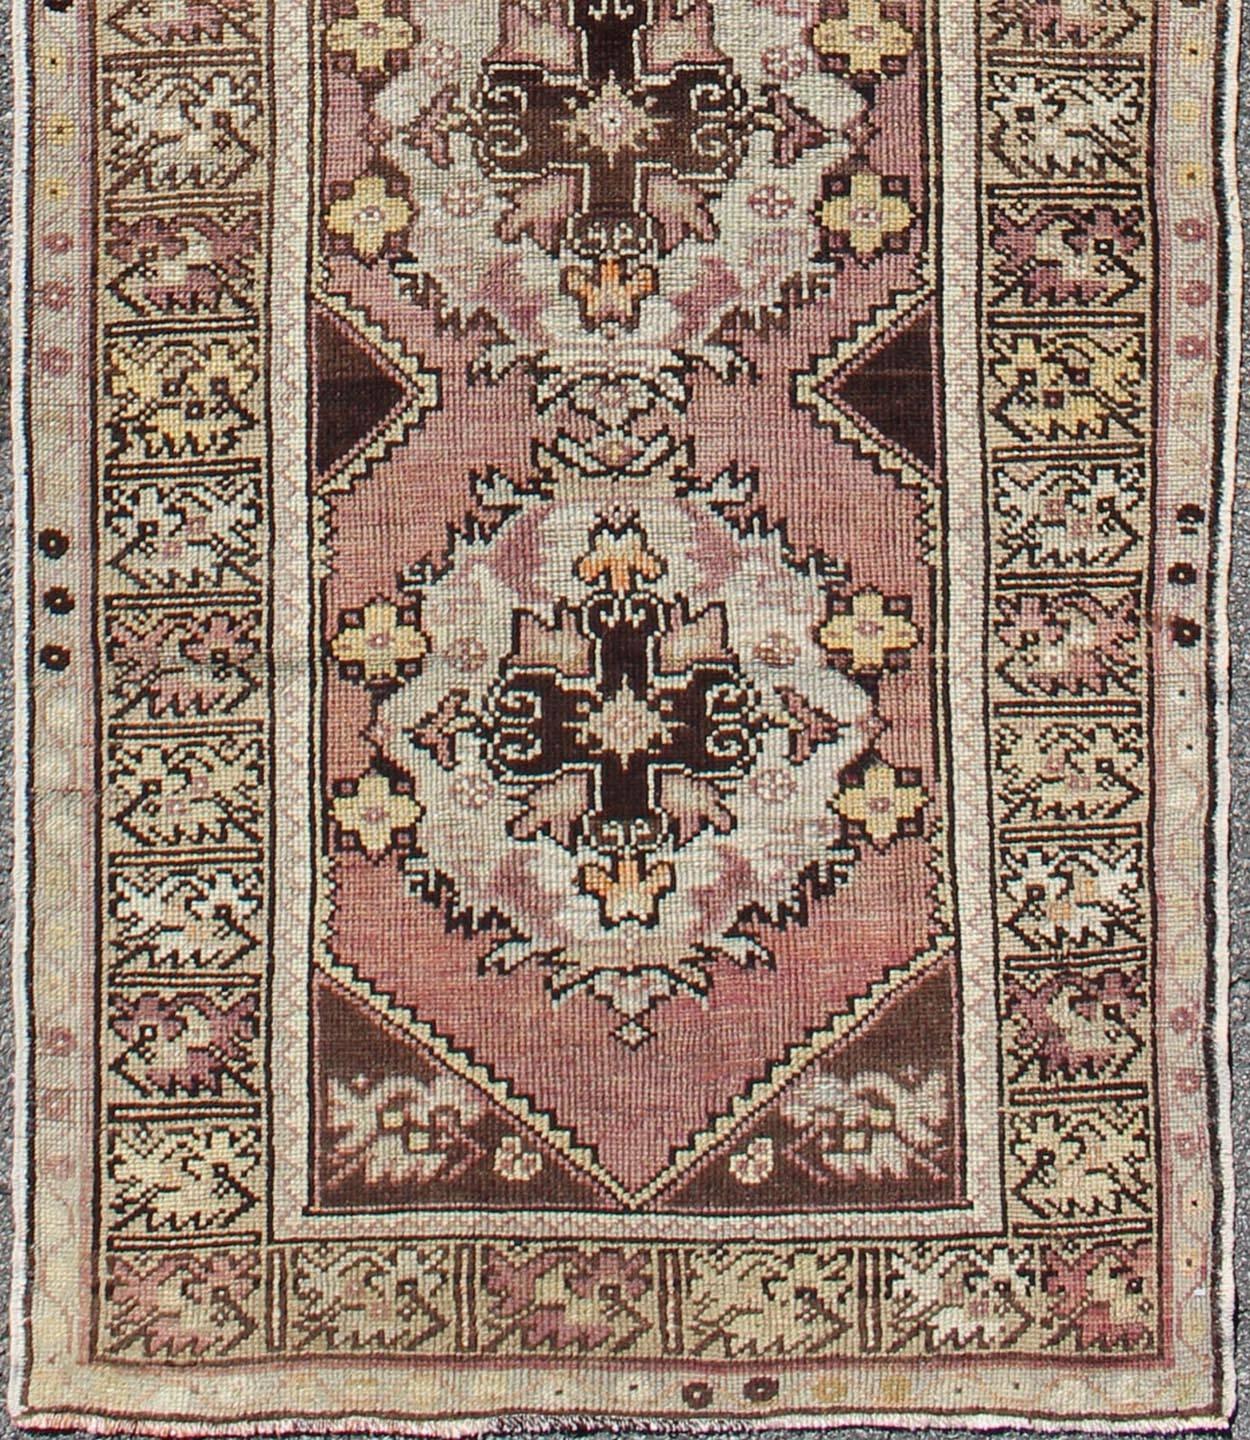 Measures: 2'11'' x 9'8''.
This beautiful vintage Oushak runner from 1940s Turkey features a Classic Oushak design. The reddish-colored ground is home to interconnected, layered, floral, vertical medallions. Colors include chocolate brown, light